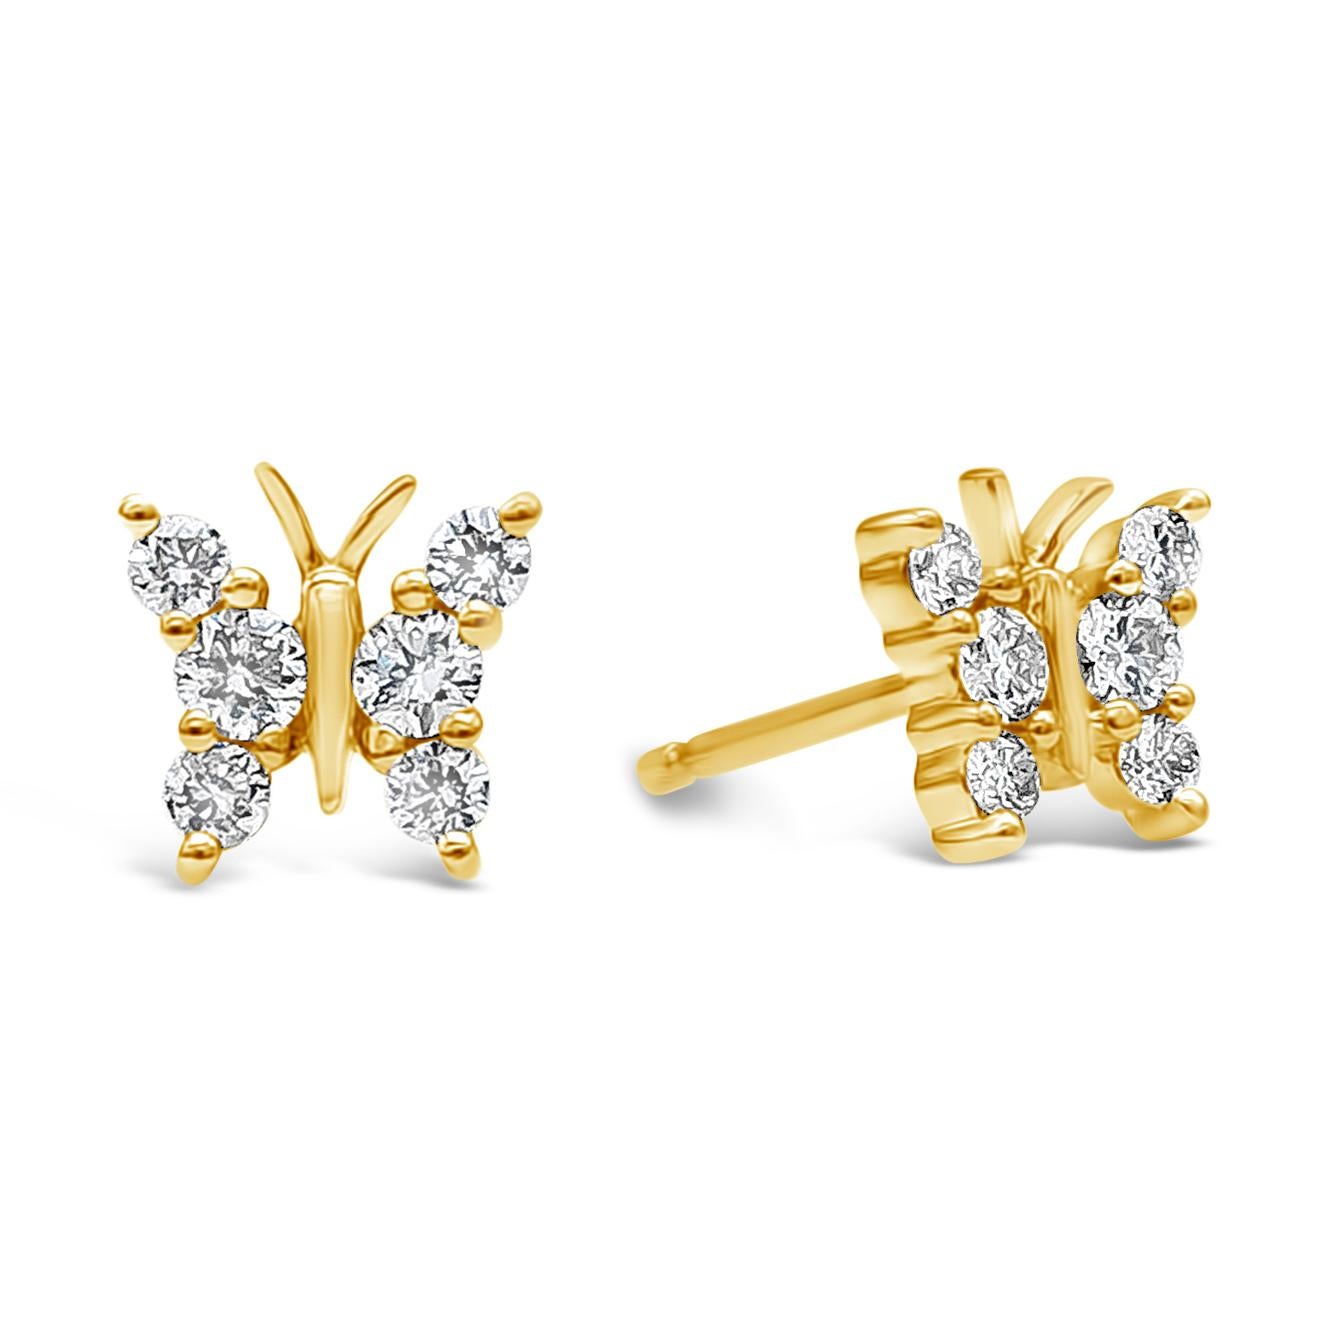 A simple and unique pair of fashion earrings, showcasing 12 pieces of round brilliant cut diamonds, set on a chic butterfly motif design made of 18K yellow gold. Diamonds weigh 0.30 carats total. Perfect piece for everyday wear.

Roman Malakov is a